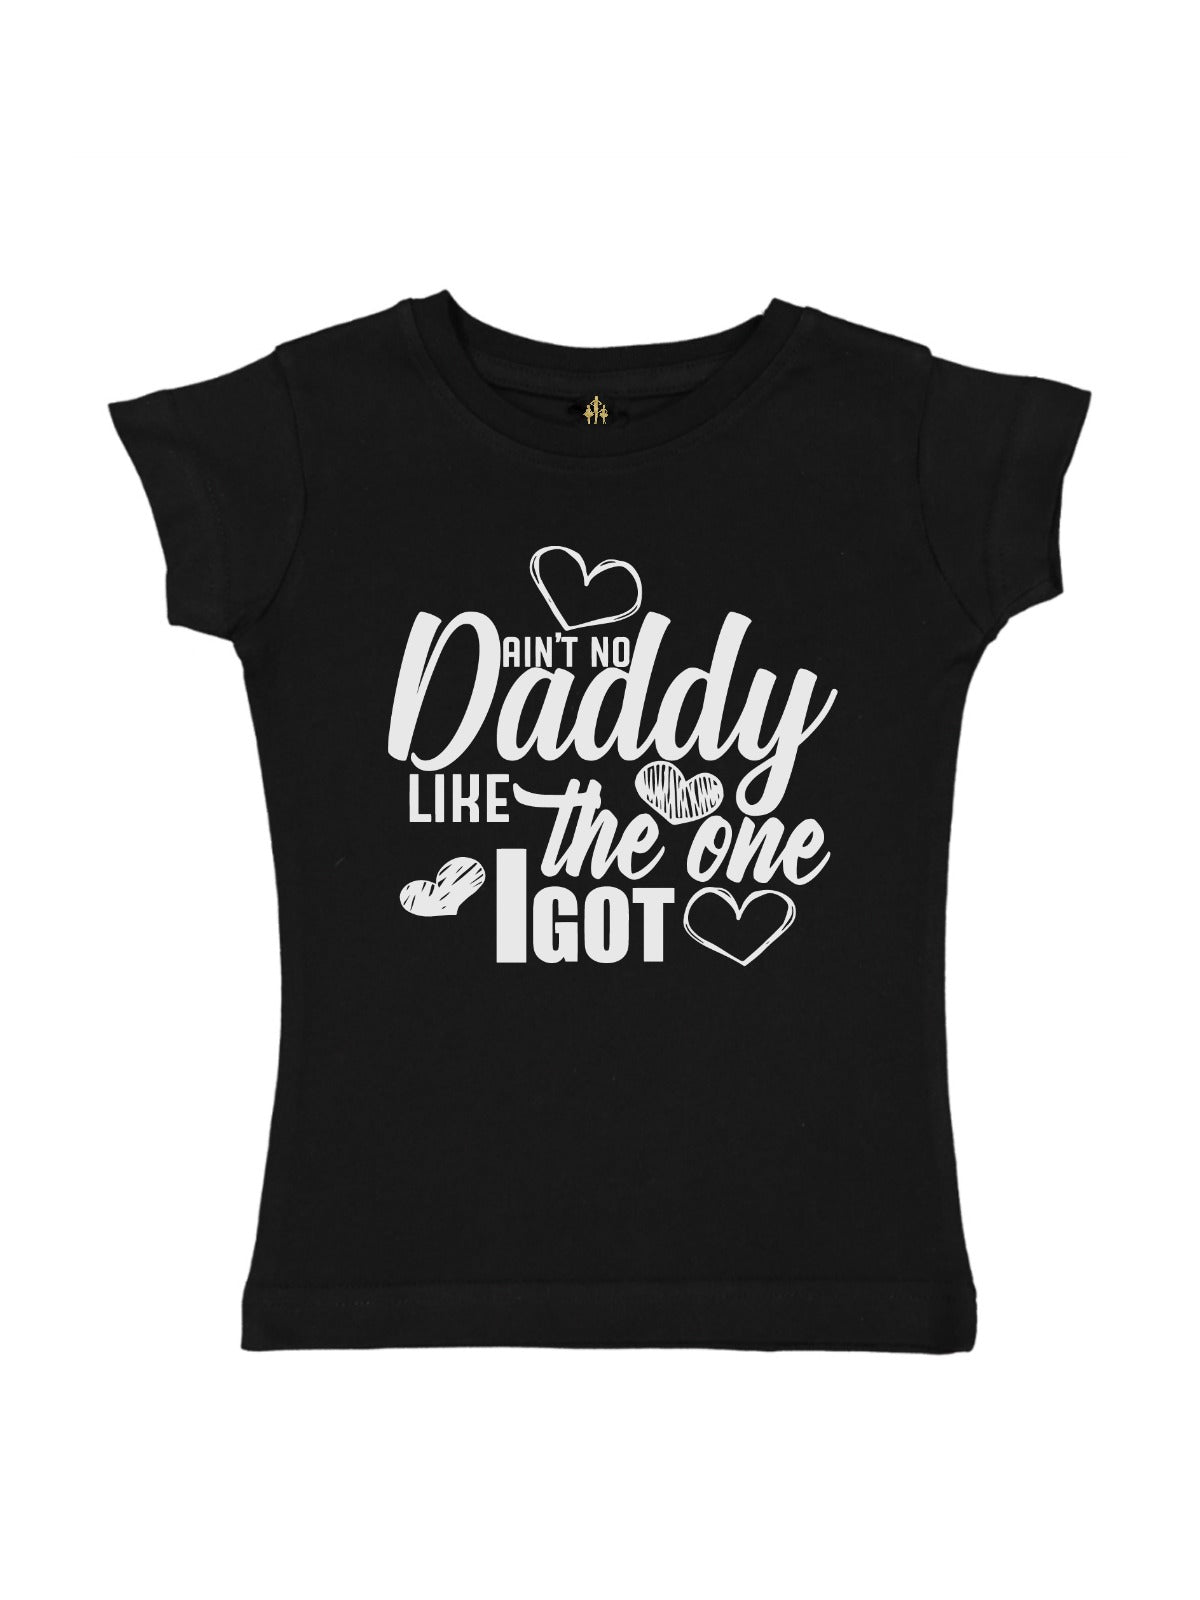 Ain't No Daddy like the One I Got Girls Short Sleeve Shirt in Black